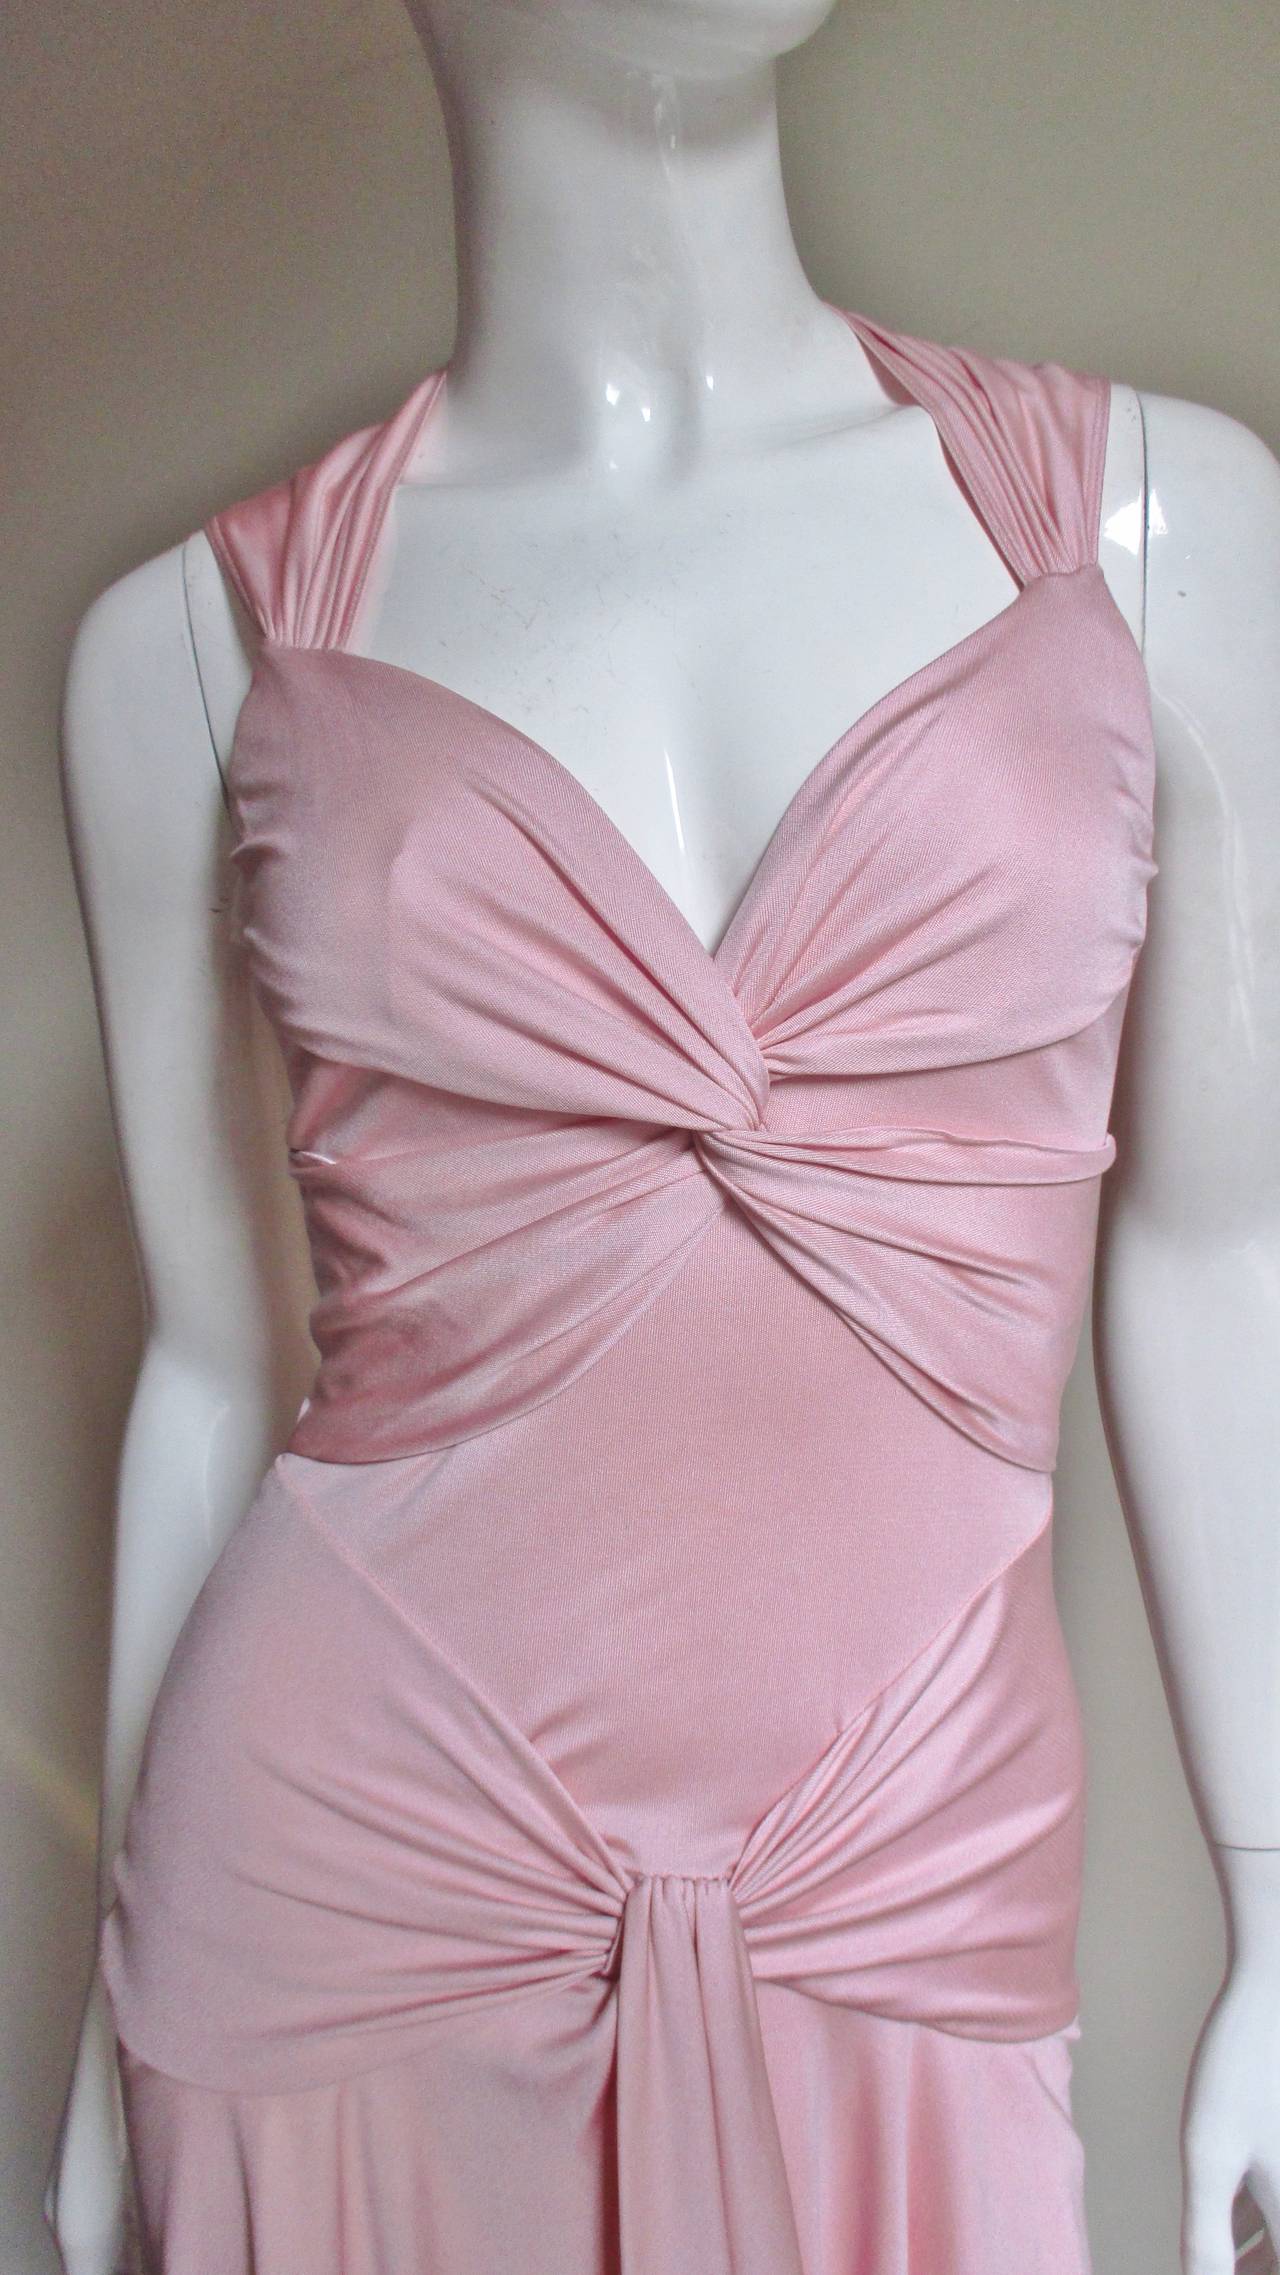 A great soft pink silk dress from Valentino.  It is sleeveless with a plunge neckline formed with gathered straps that cross the front over the bust and across the hips meeting at the center front forming a tie.  The skirt is full and graceful with